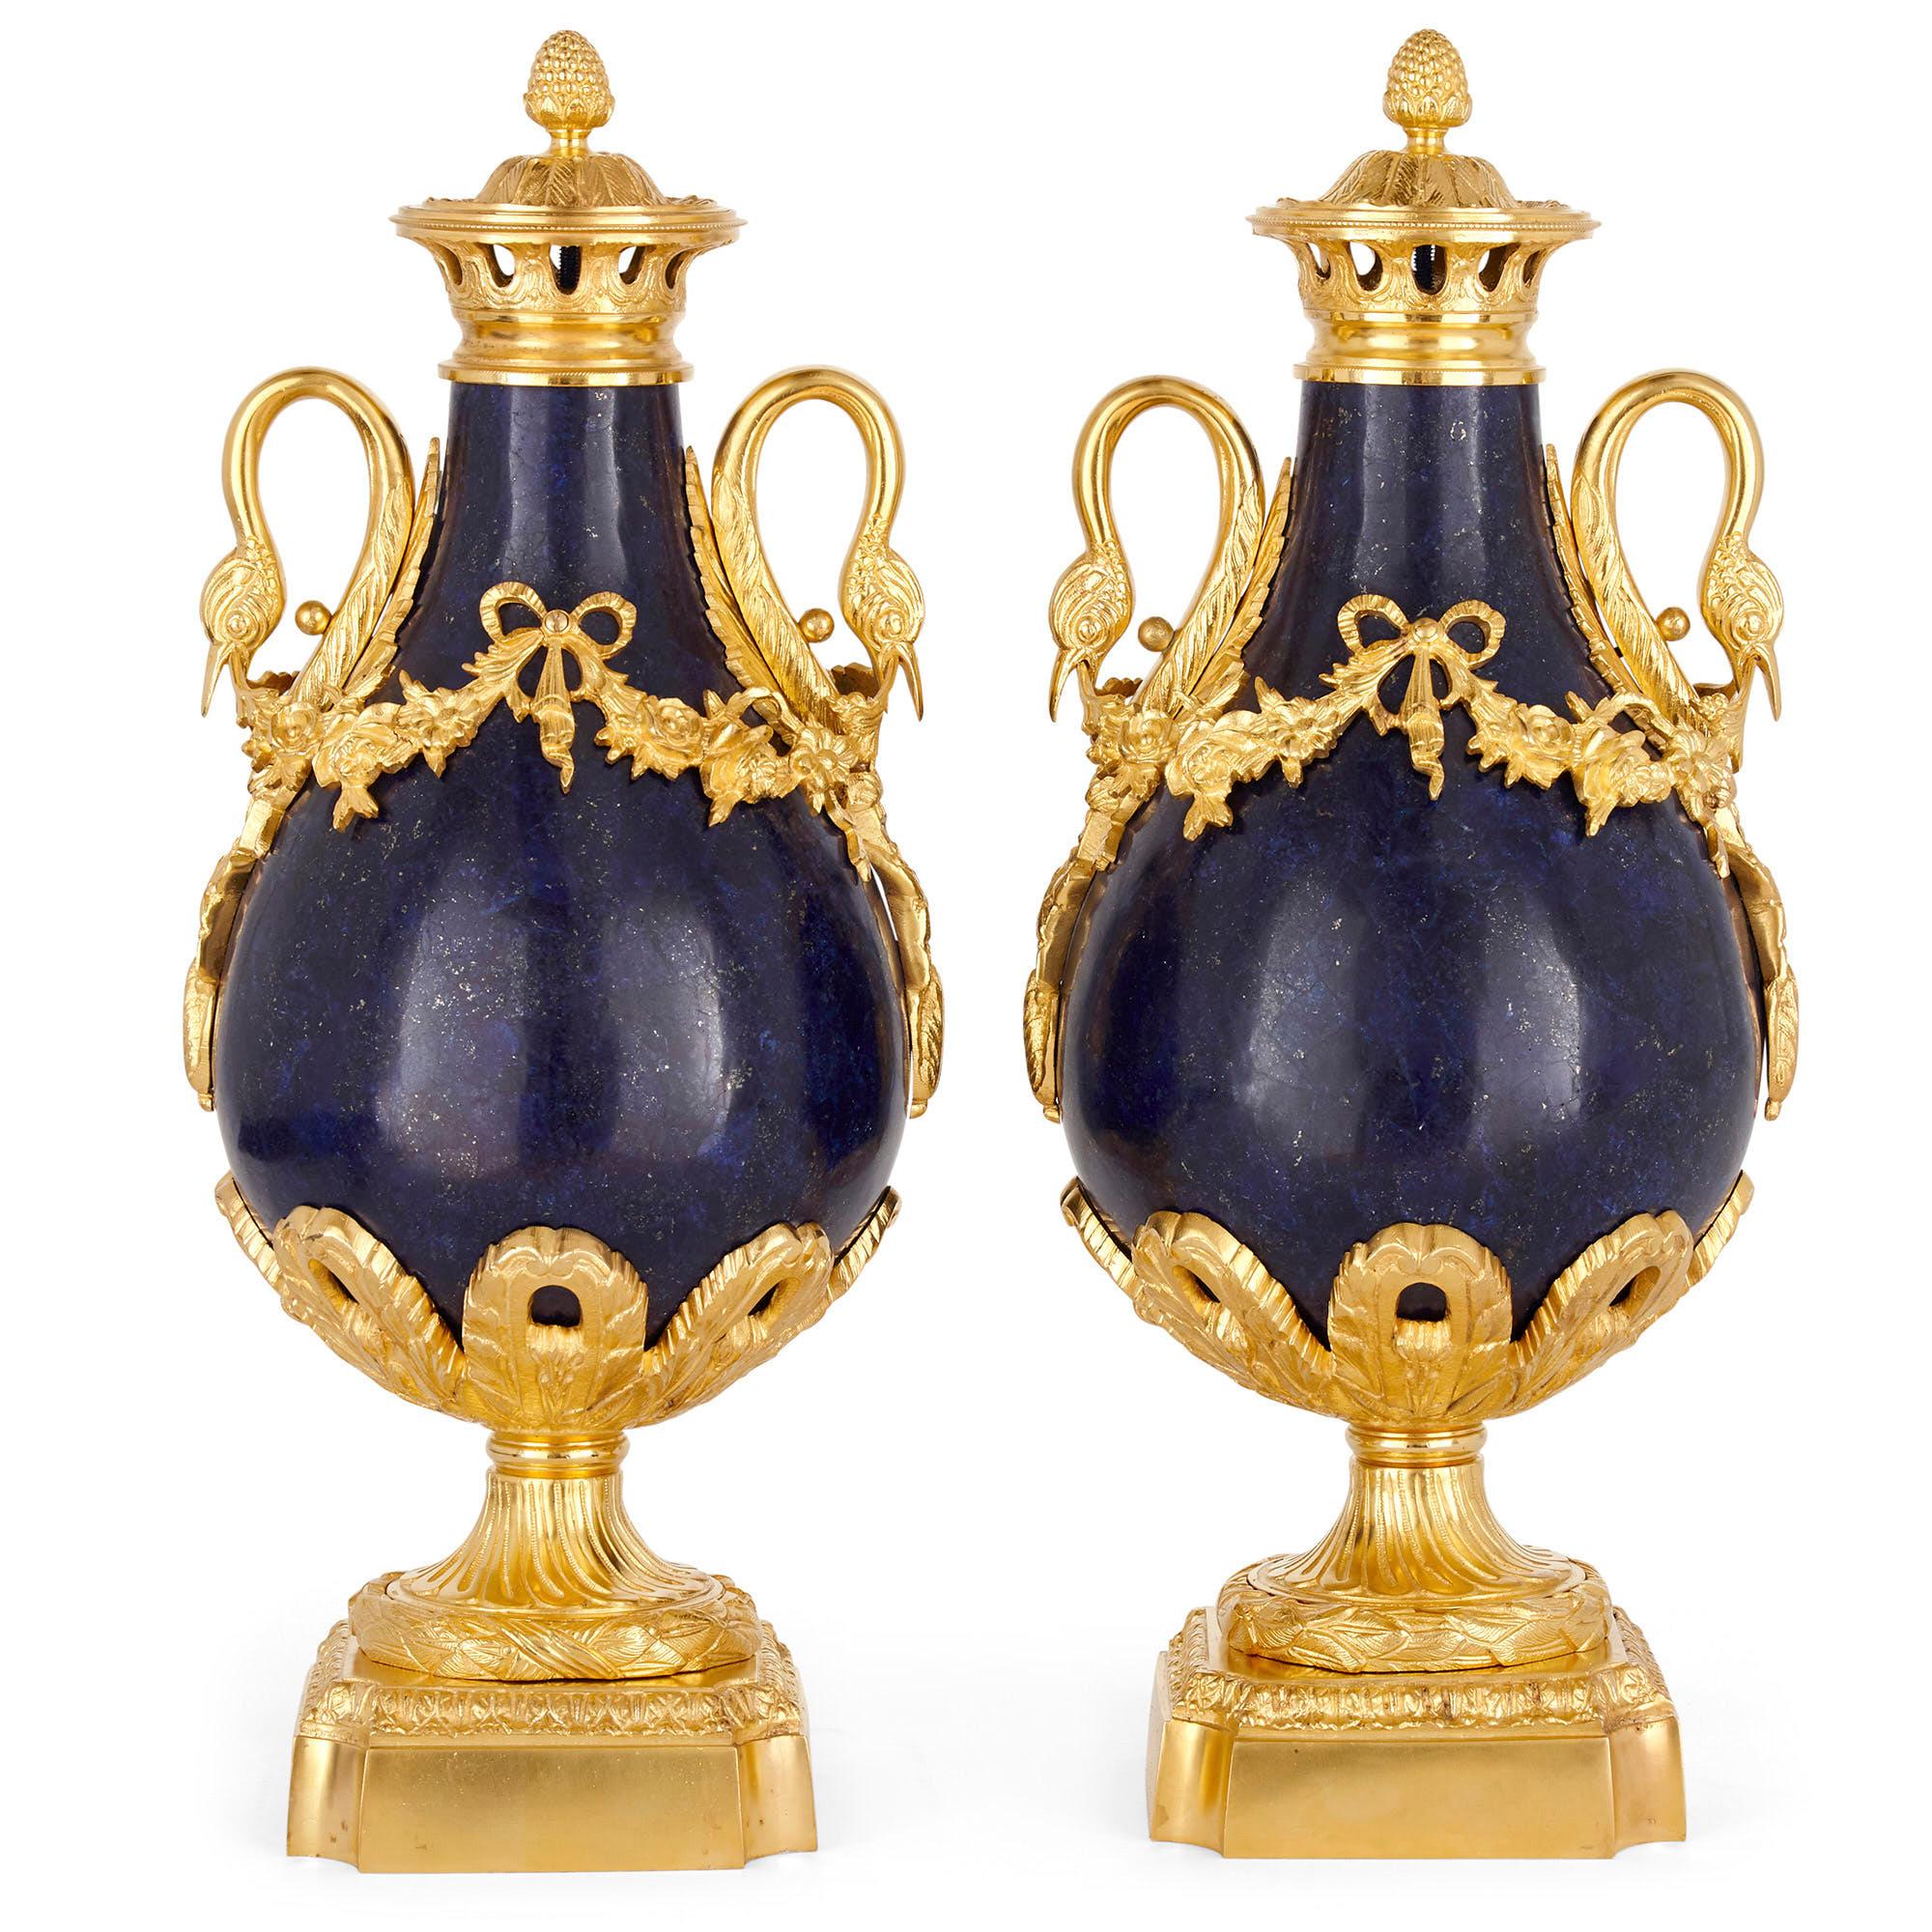 Pair of French neoclassical style lapis and gilt bronze vases
French, late 19th century
Measures: Height 46cm, diameter 19cm

Each vase in this pair, crafted from gilt bronze mounted lapis lazuli (the lapis being a later veneer), is baluster